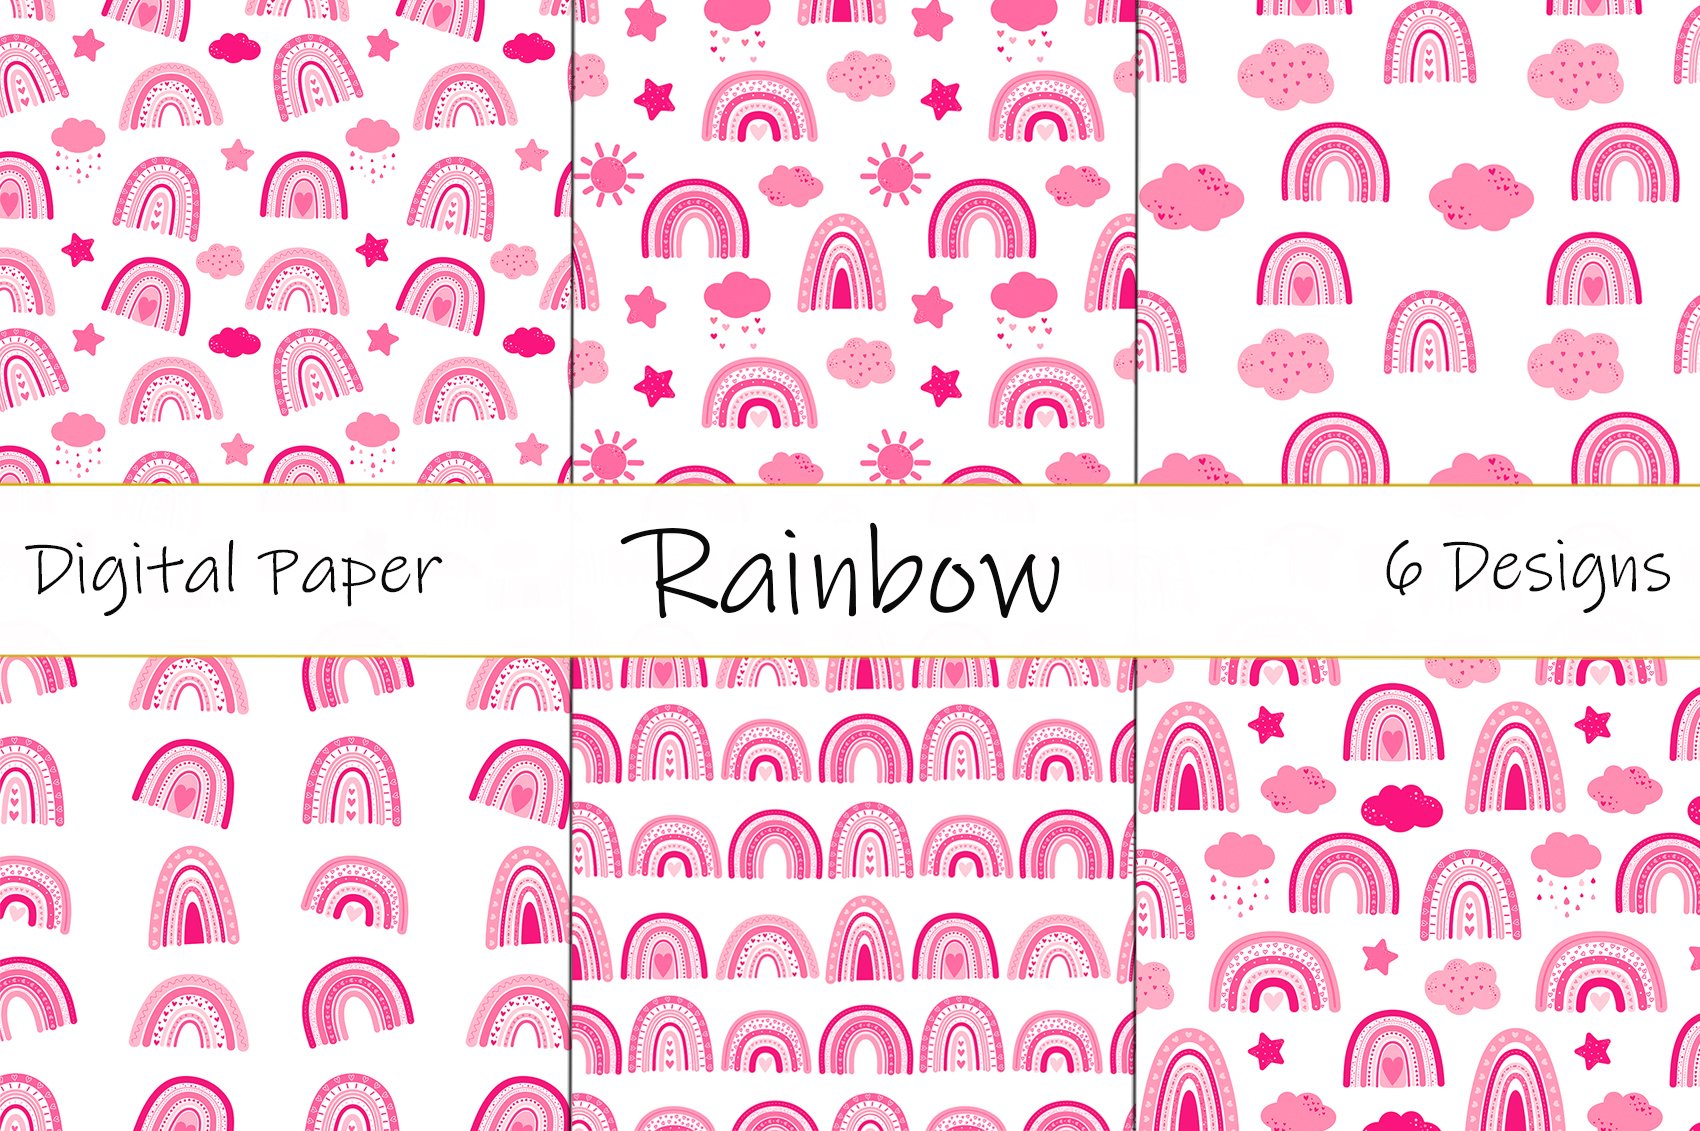 Rainbow Valentine's Day patterns cover image.